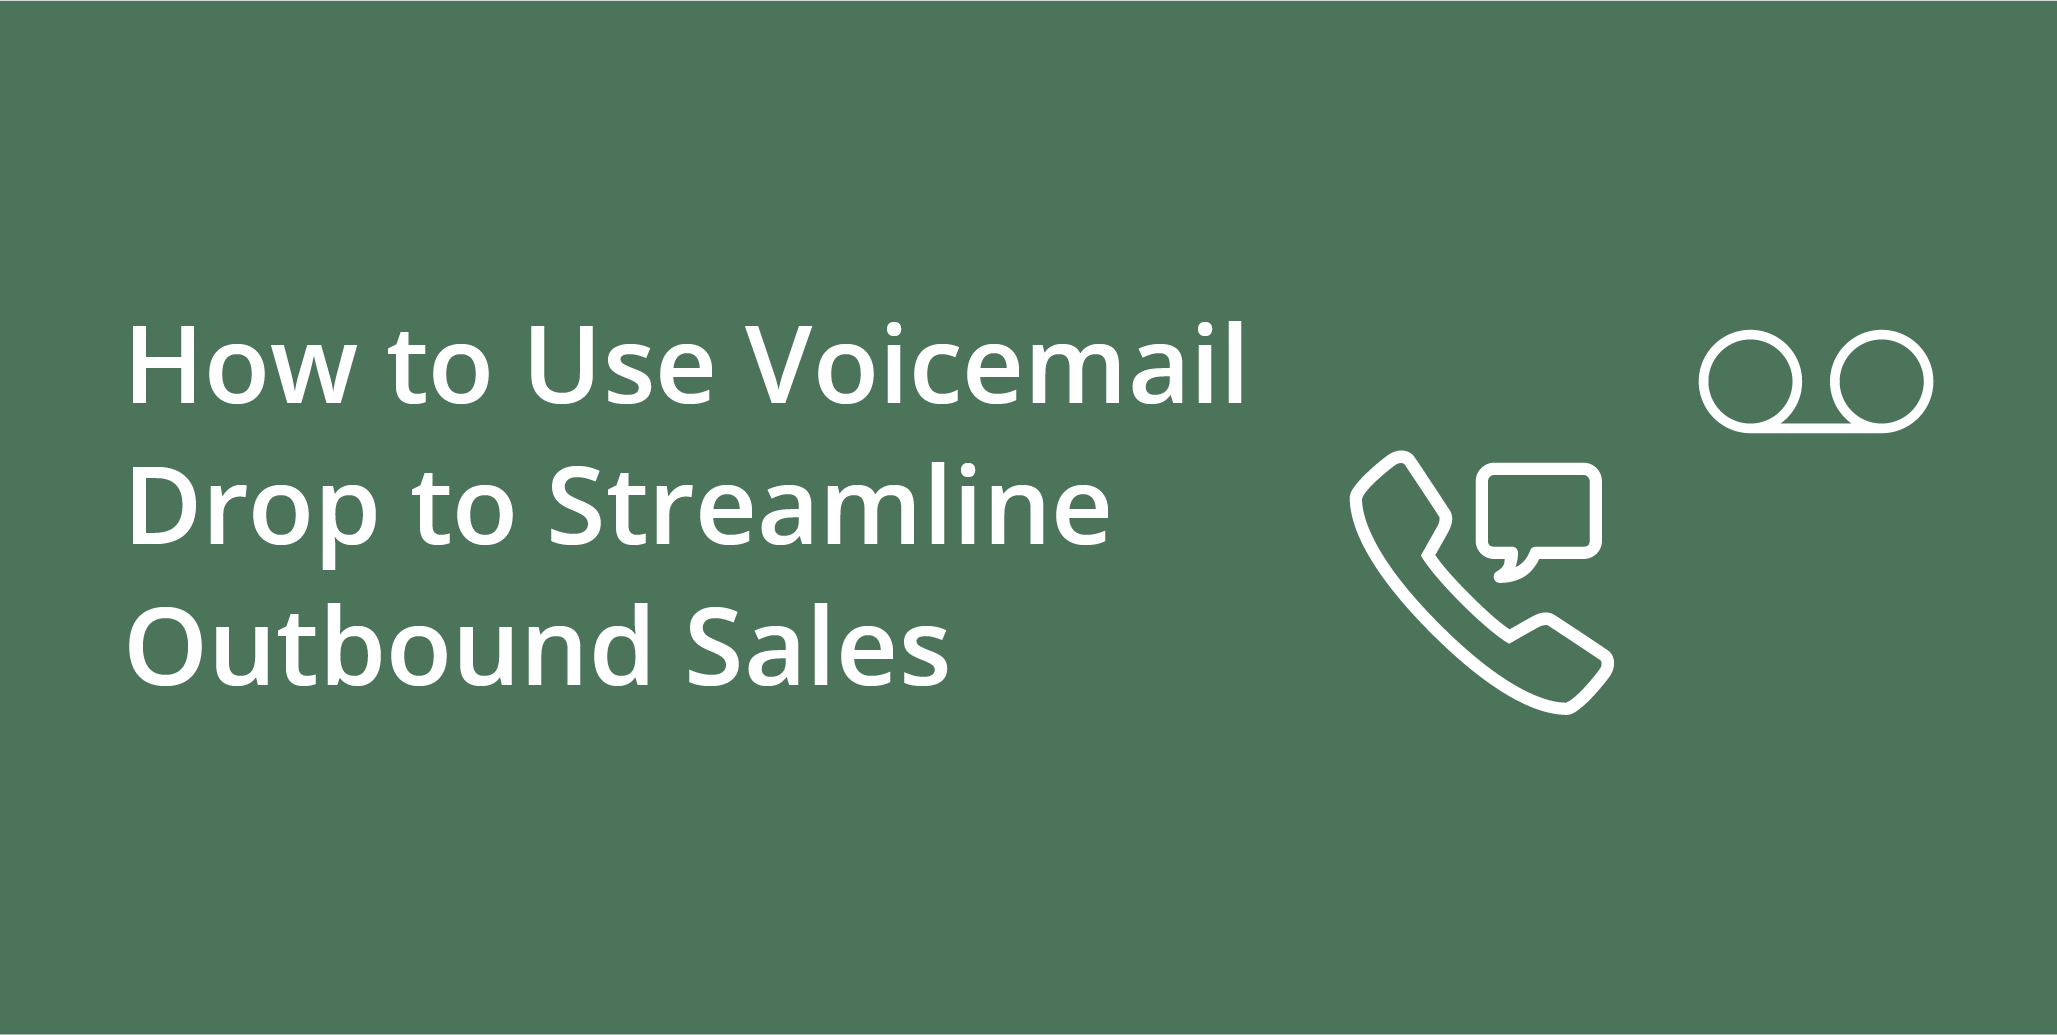 How to Use Voicemail Drop to Streamline Outbound Sales | Telephones for business